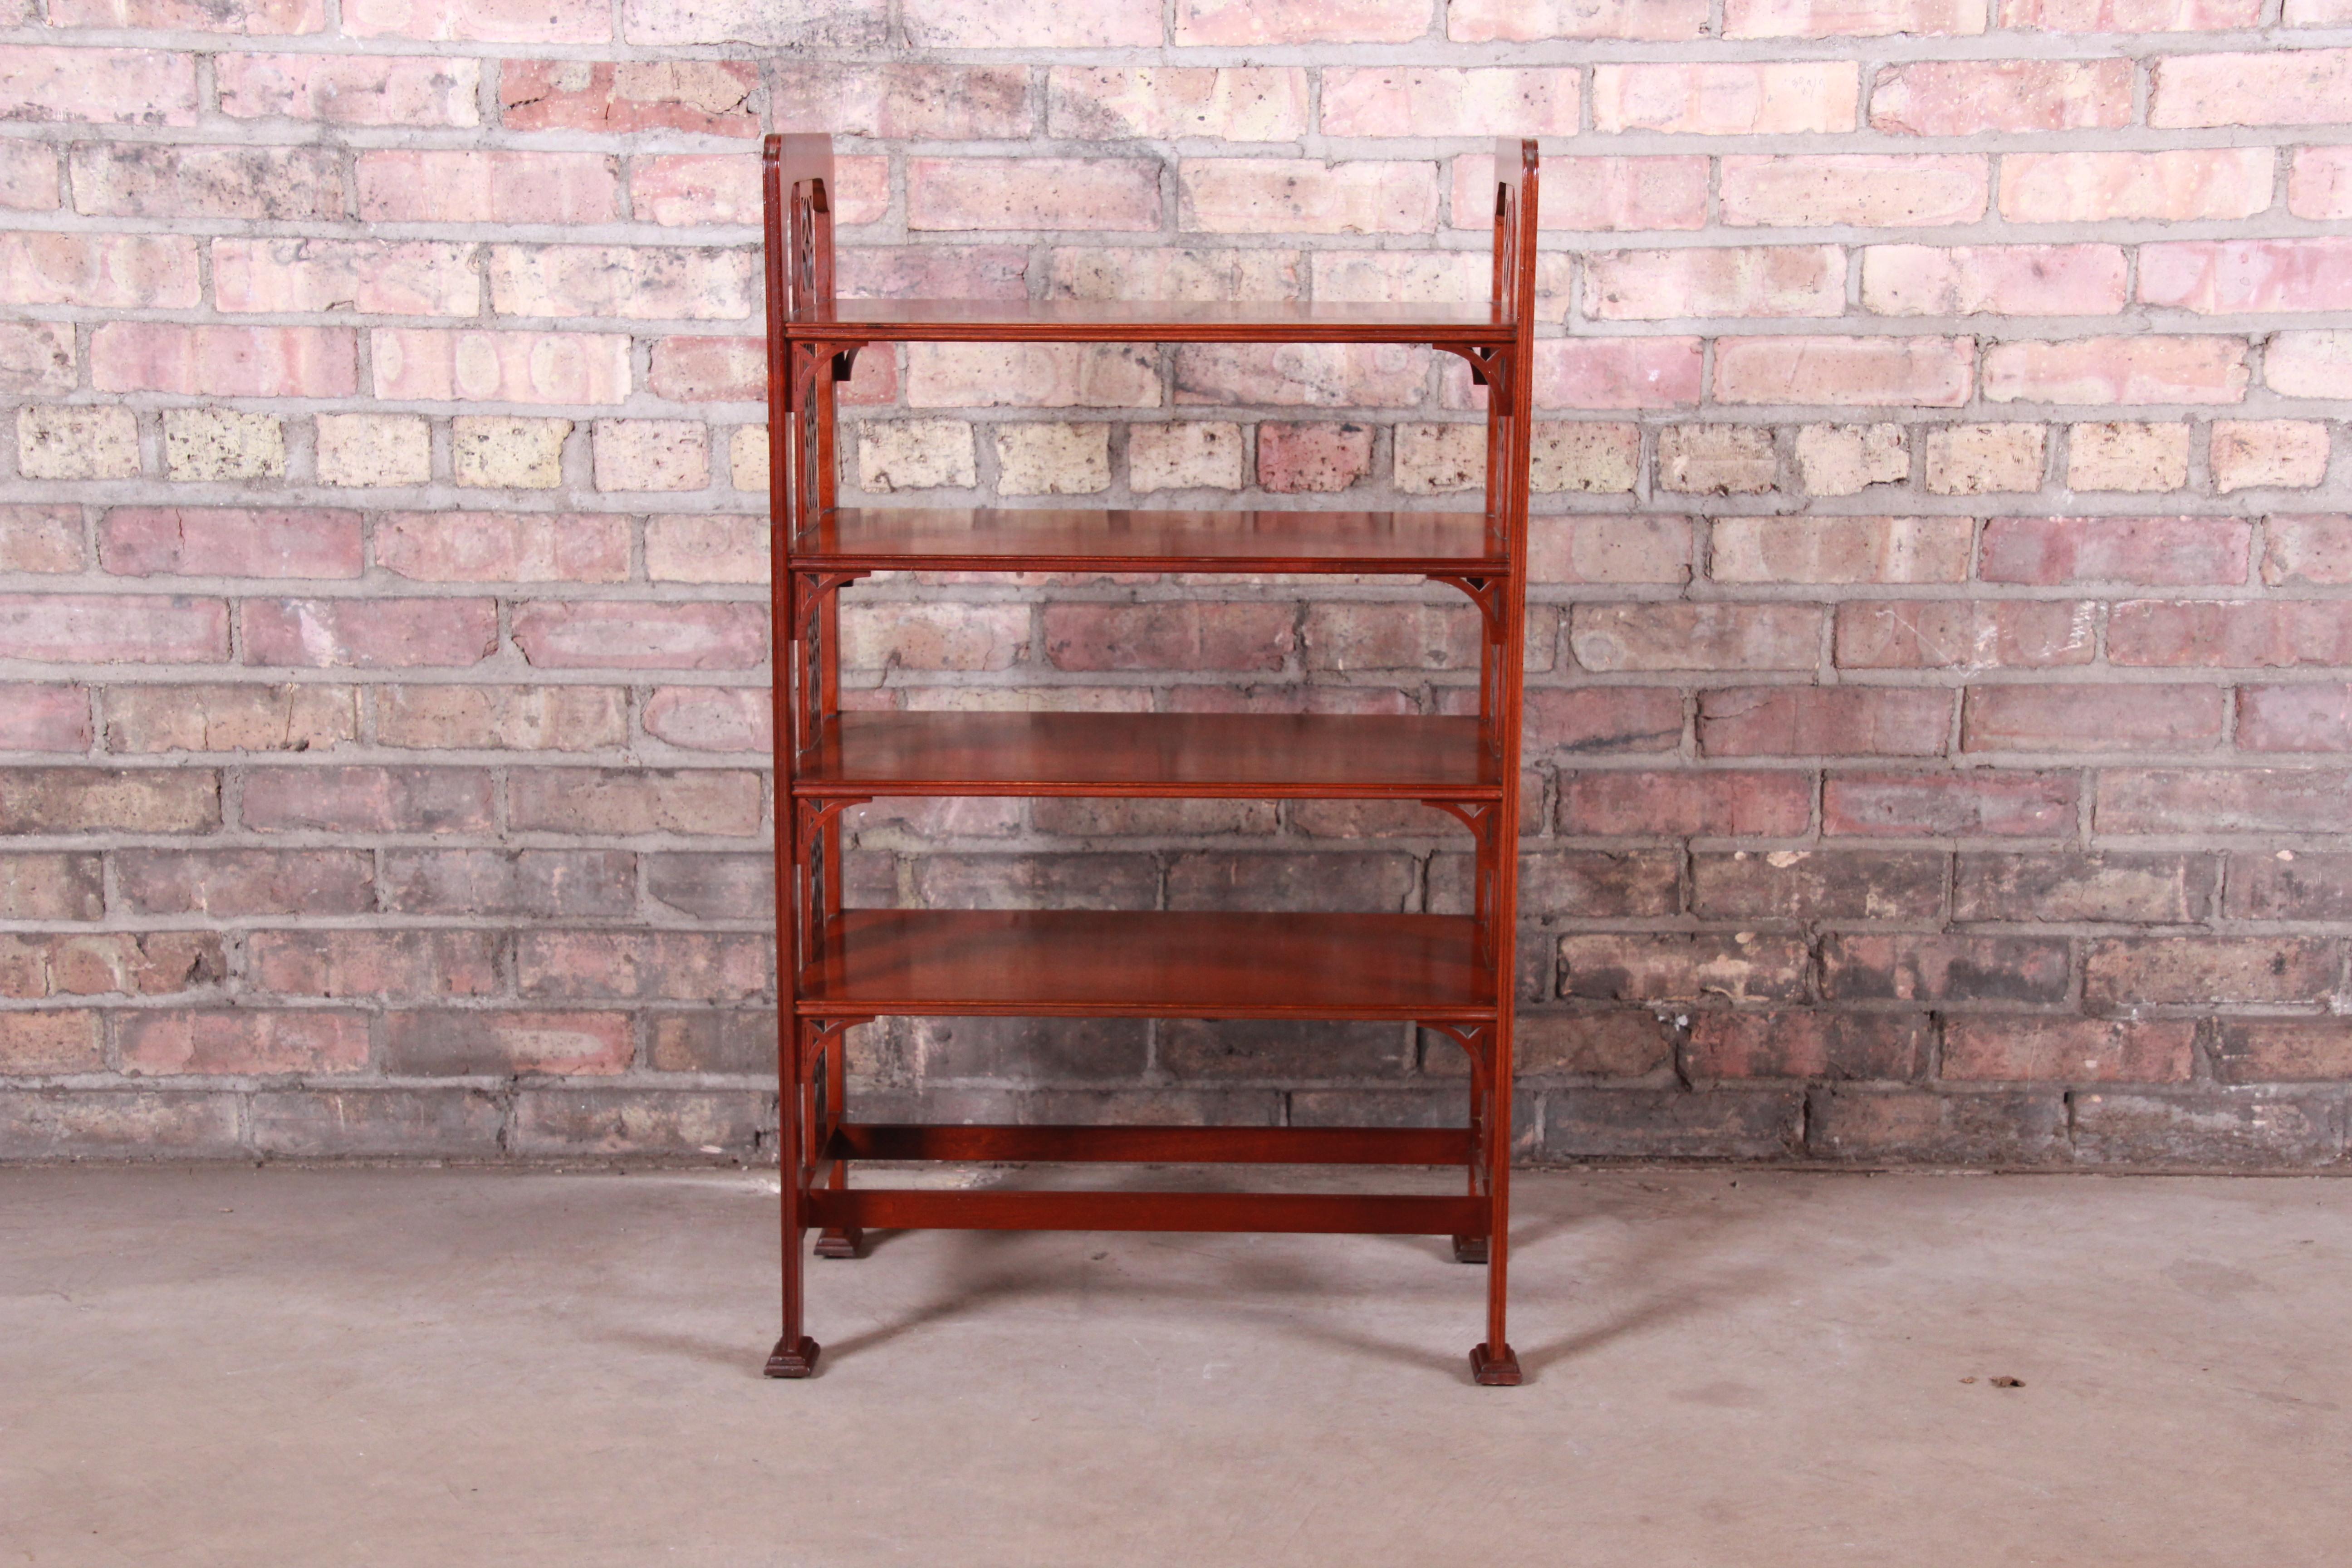 Chippendale Baker Furniture Historic Charleston Collection Carved Mahogany Four-Tier Étagère